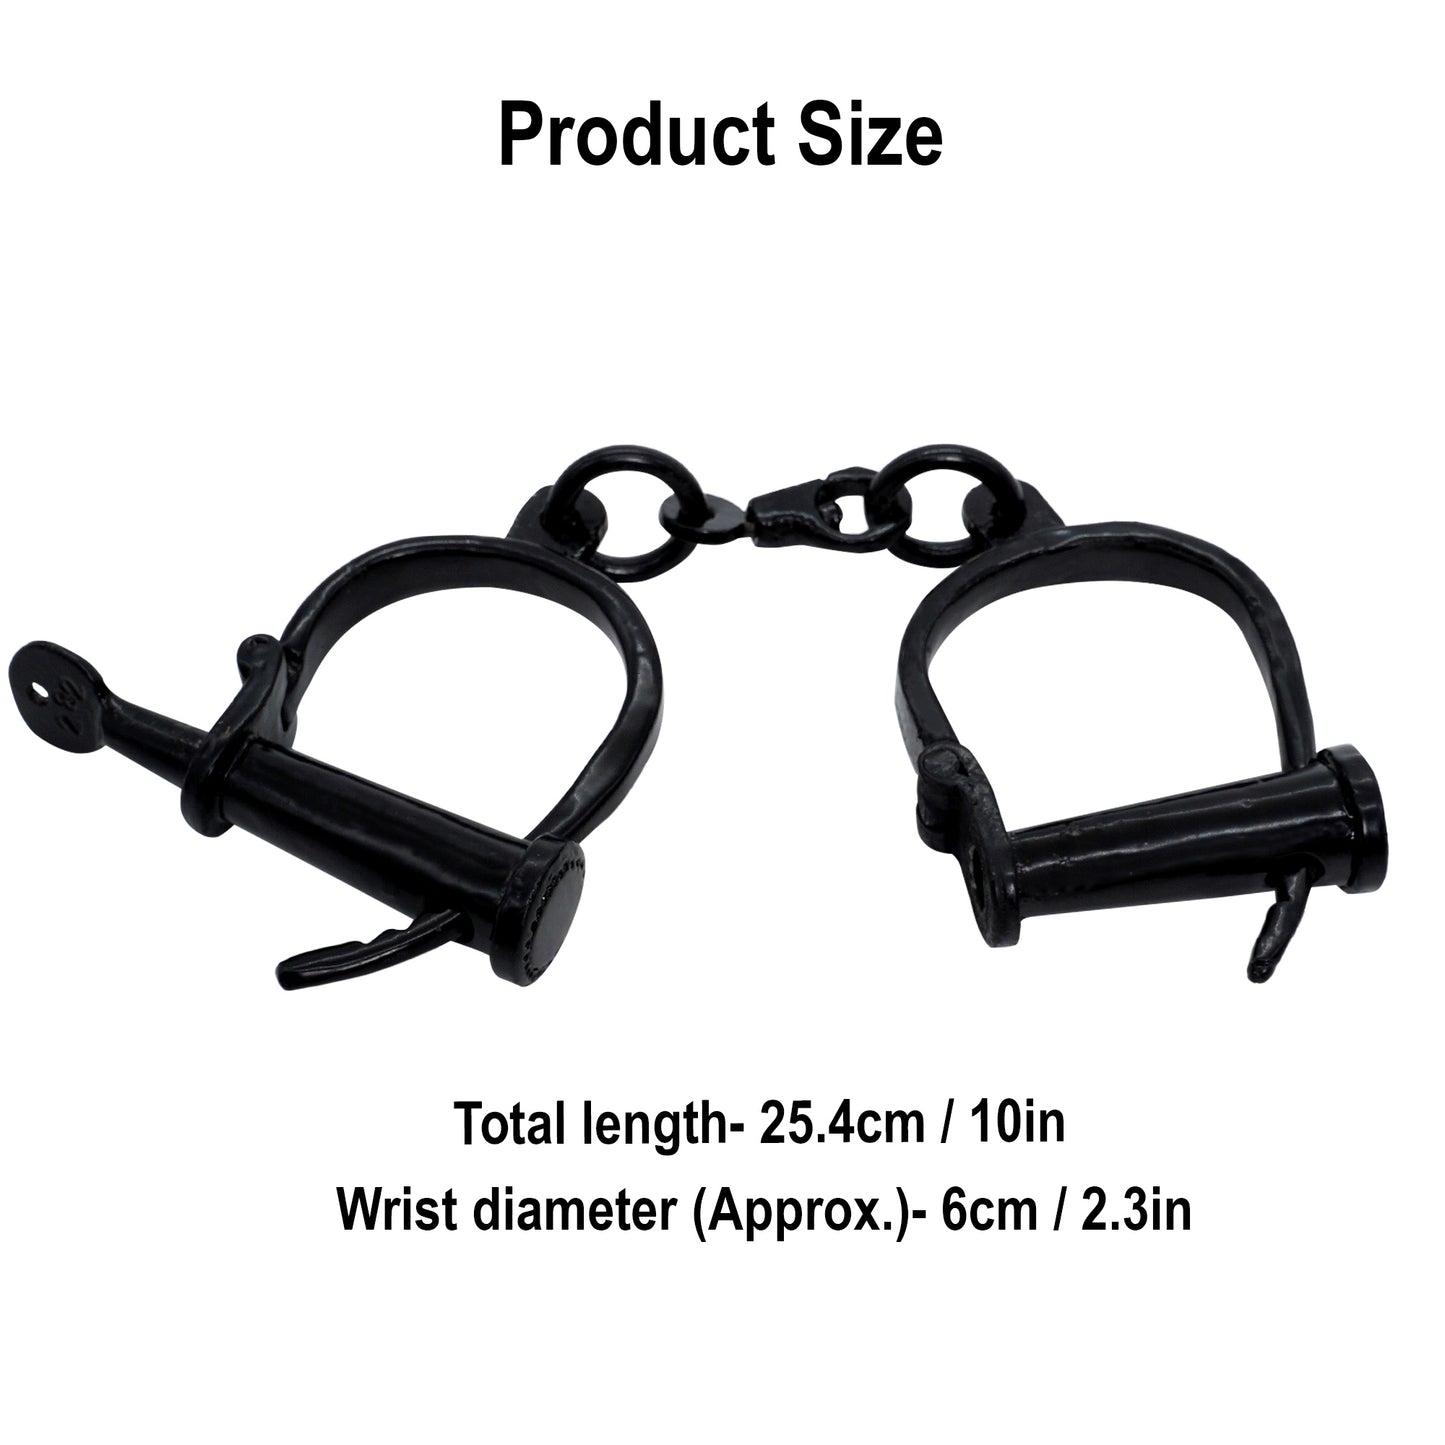 Medieval Iron Shackles - gothic handcuffs of cast iron